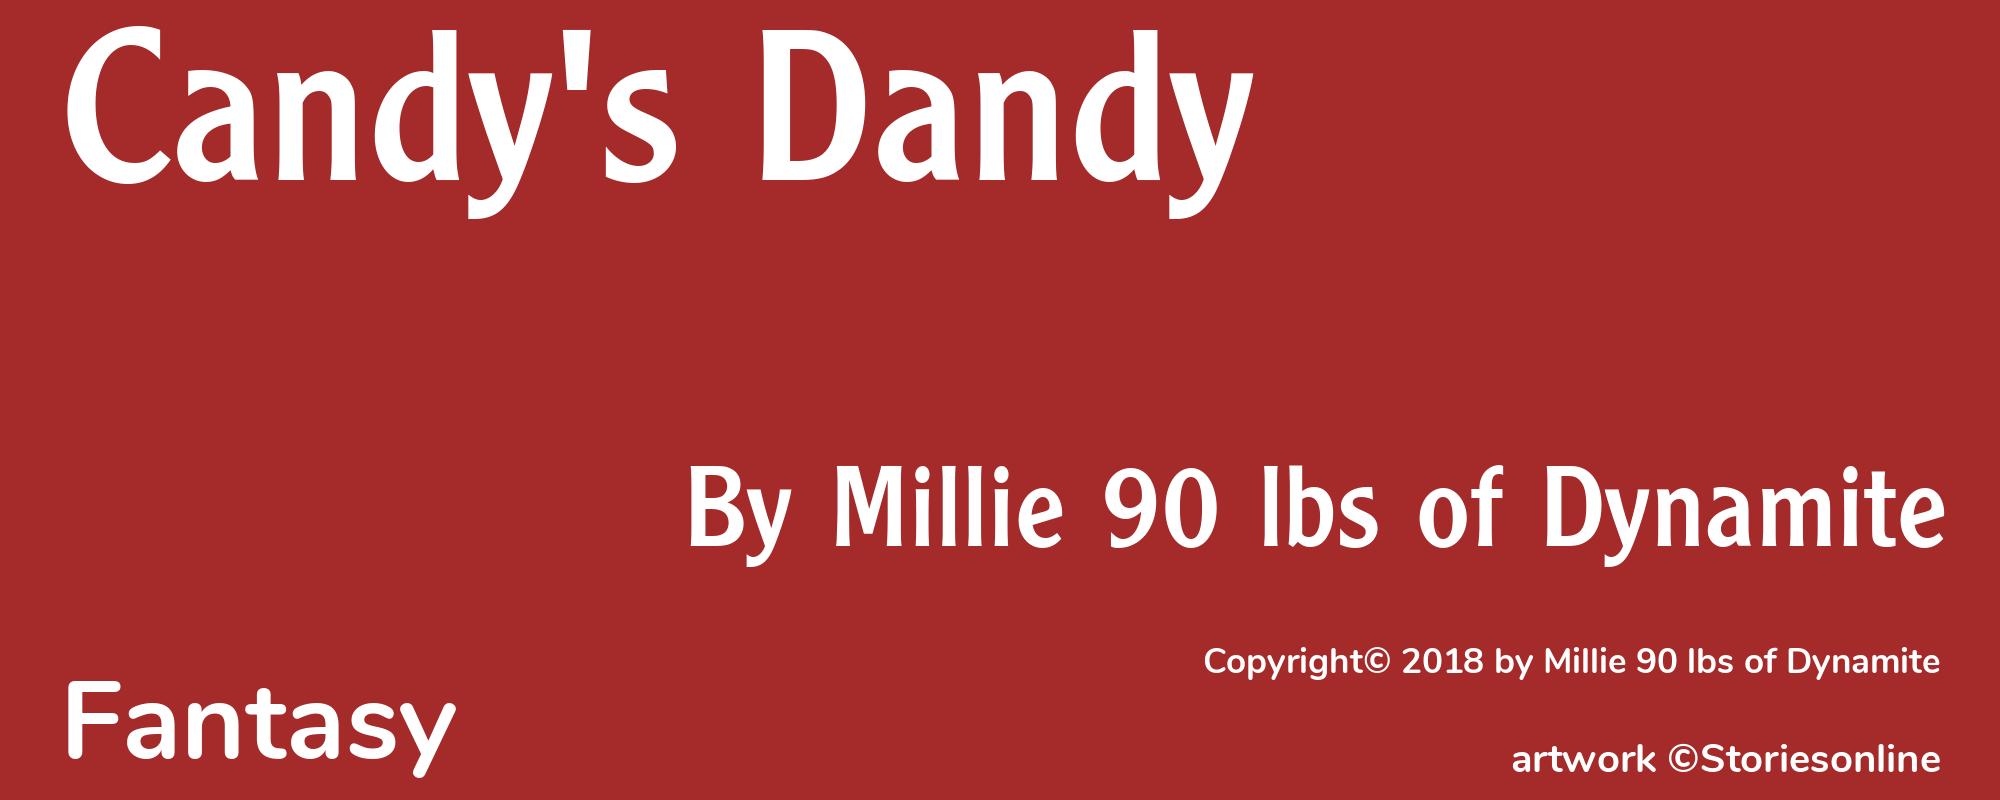 Candy's Dandy - Cover